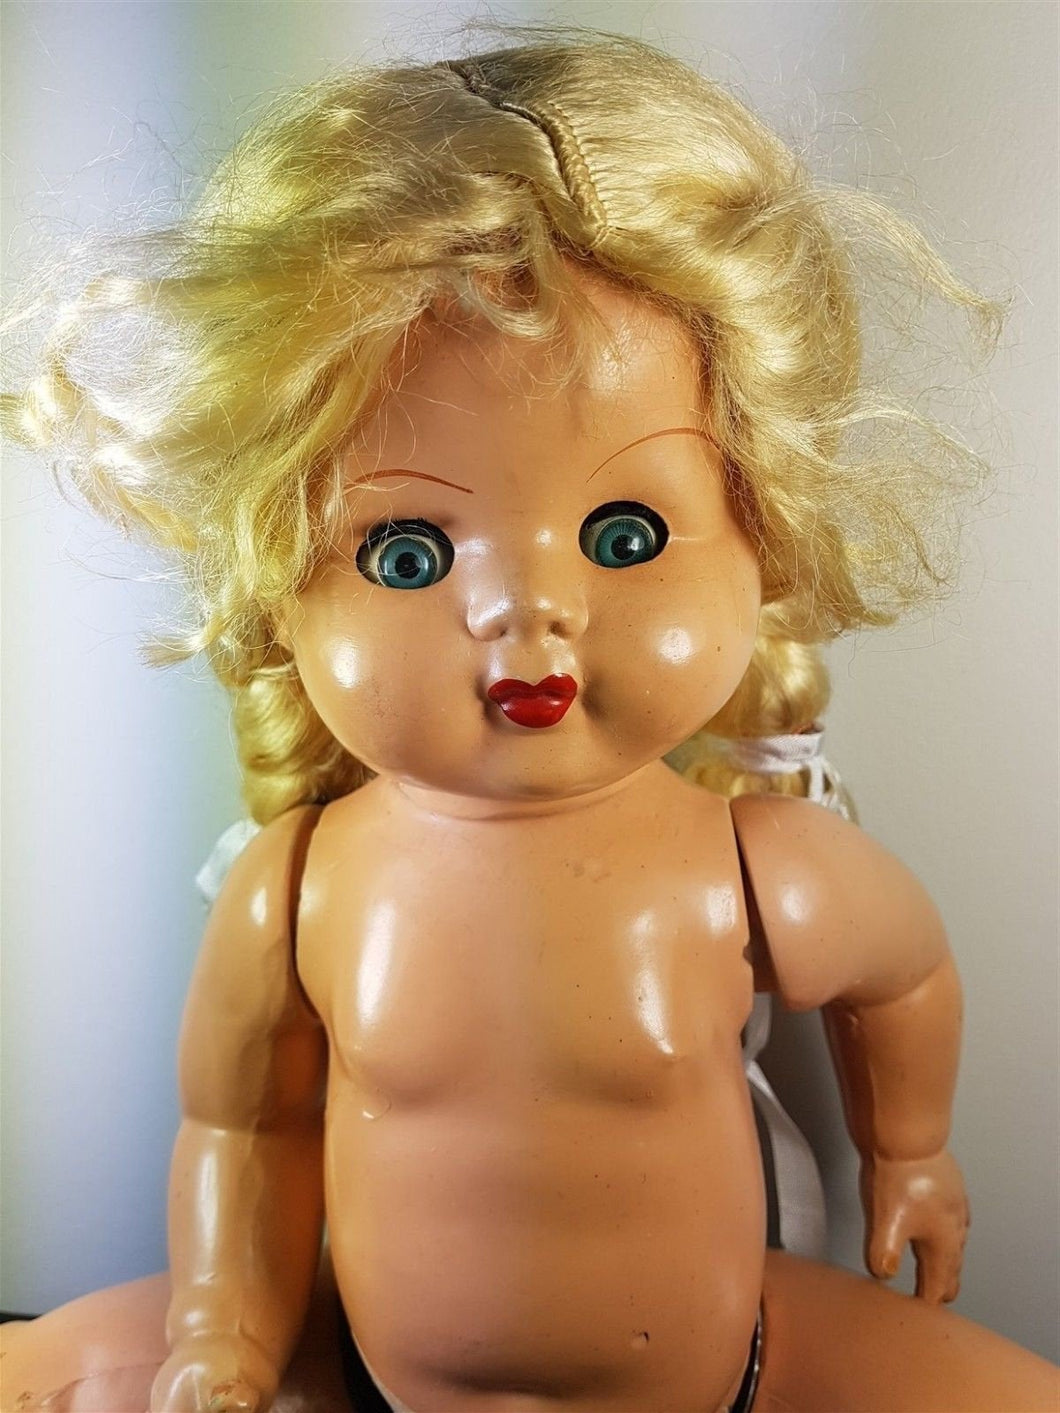 Vintage Composition Doll Girl 1930's Original 19 Inch with Noise Maker with Sleep Eyes and Blond Hair Antique